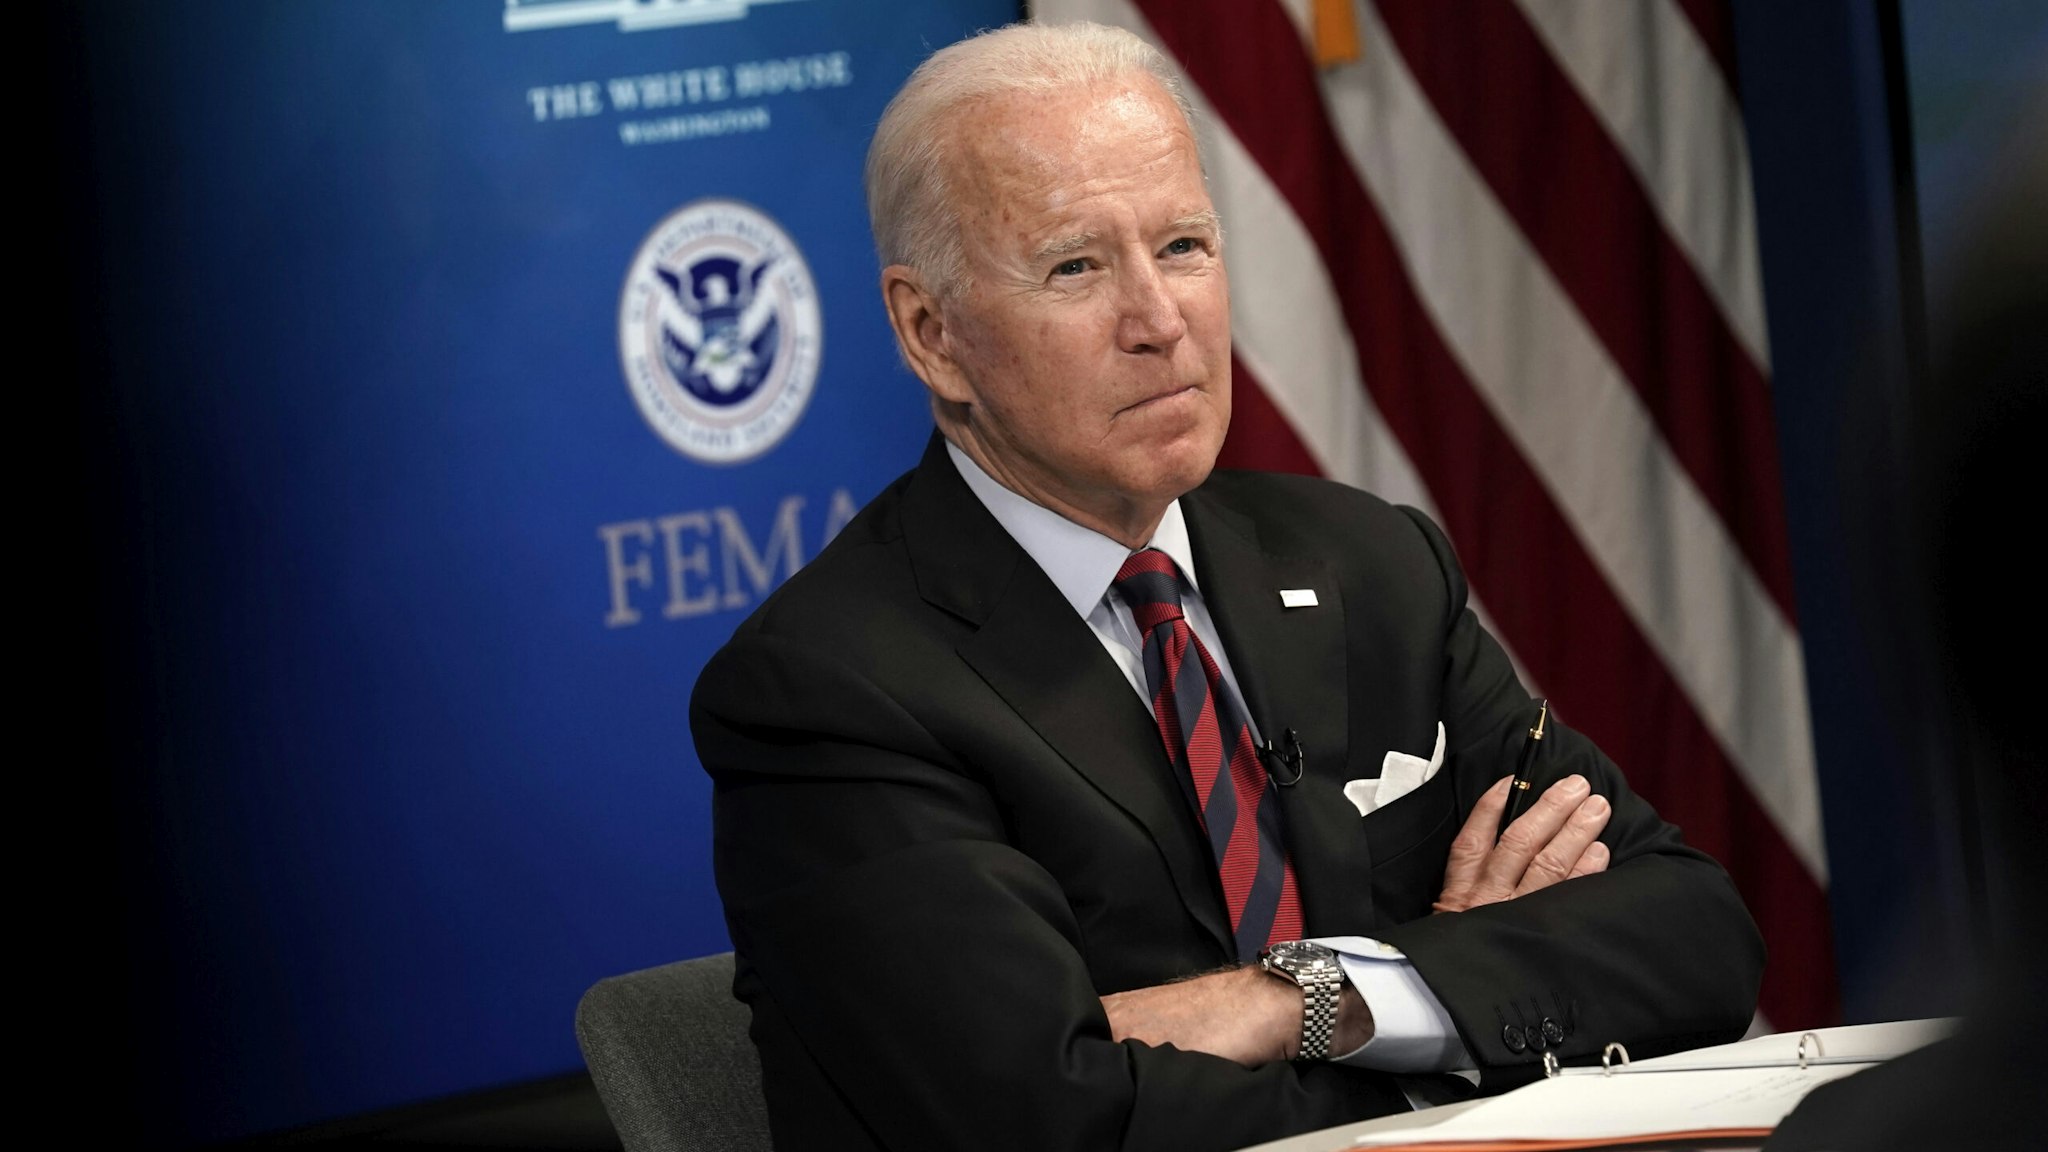 U.S. President Joe Biden during a virtual Hurricane Ida briefing at the White House in Washington, D.C, U.S, on Monday, Aug. 30, 2021. Biden vowed Monday to continue providing federal support in the aftermath of Hurricane Ida, which made landfall south of New Orleans and has left more than a million homes and businesses without power.